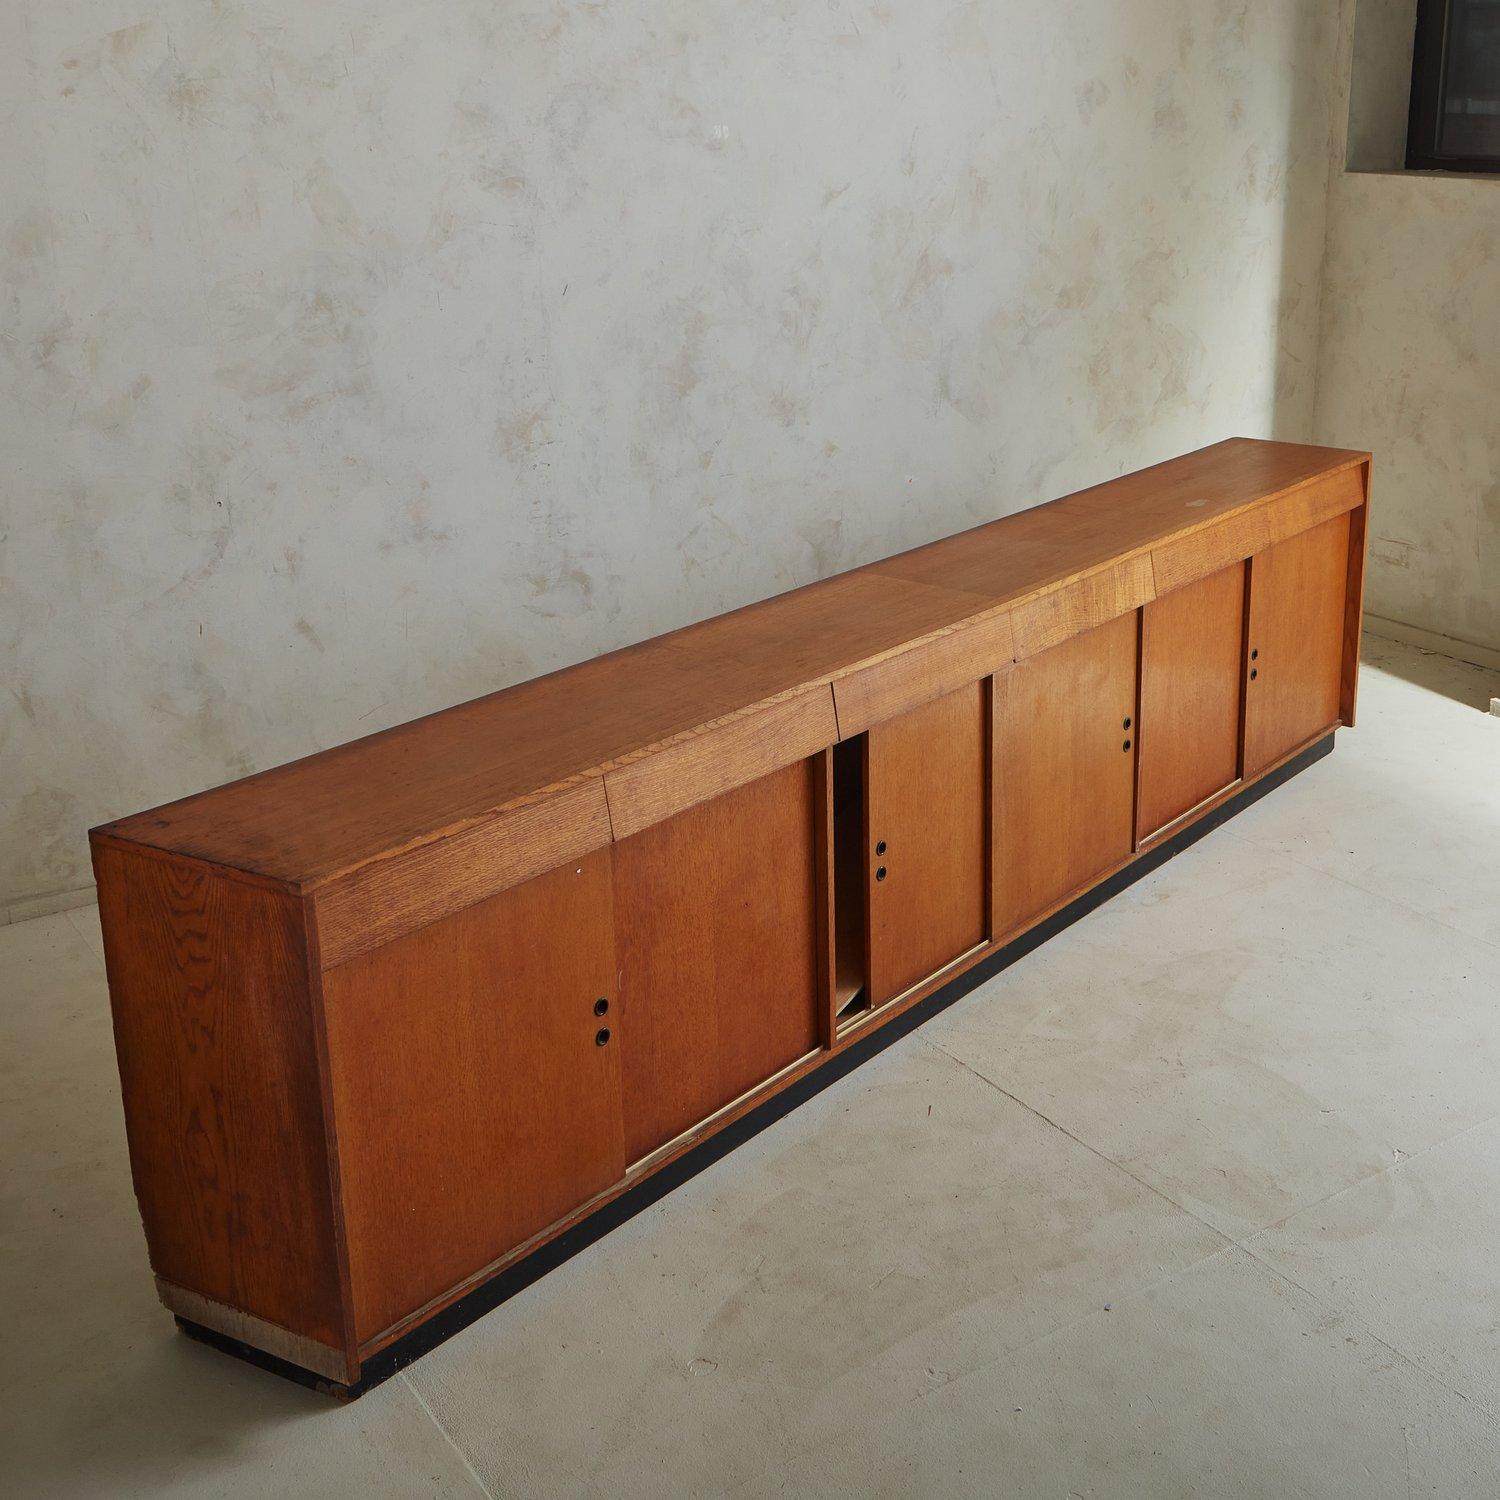 Monumental Oak Shop Cabinet with Drawers, France 1950s For Sale 2